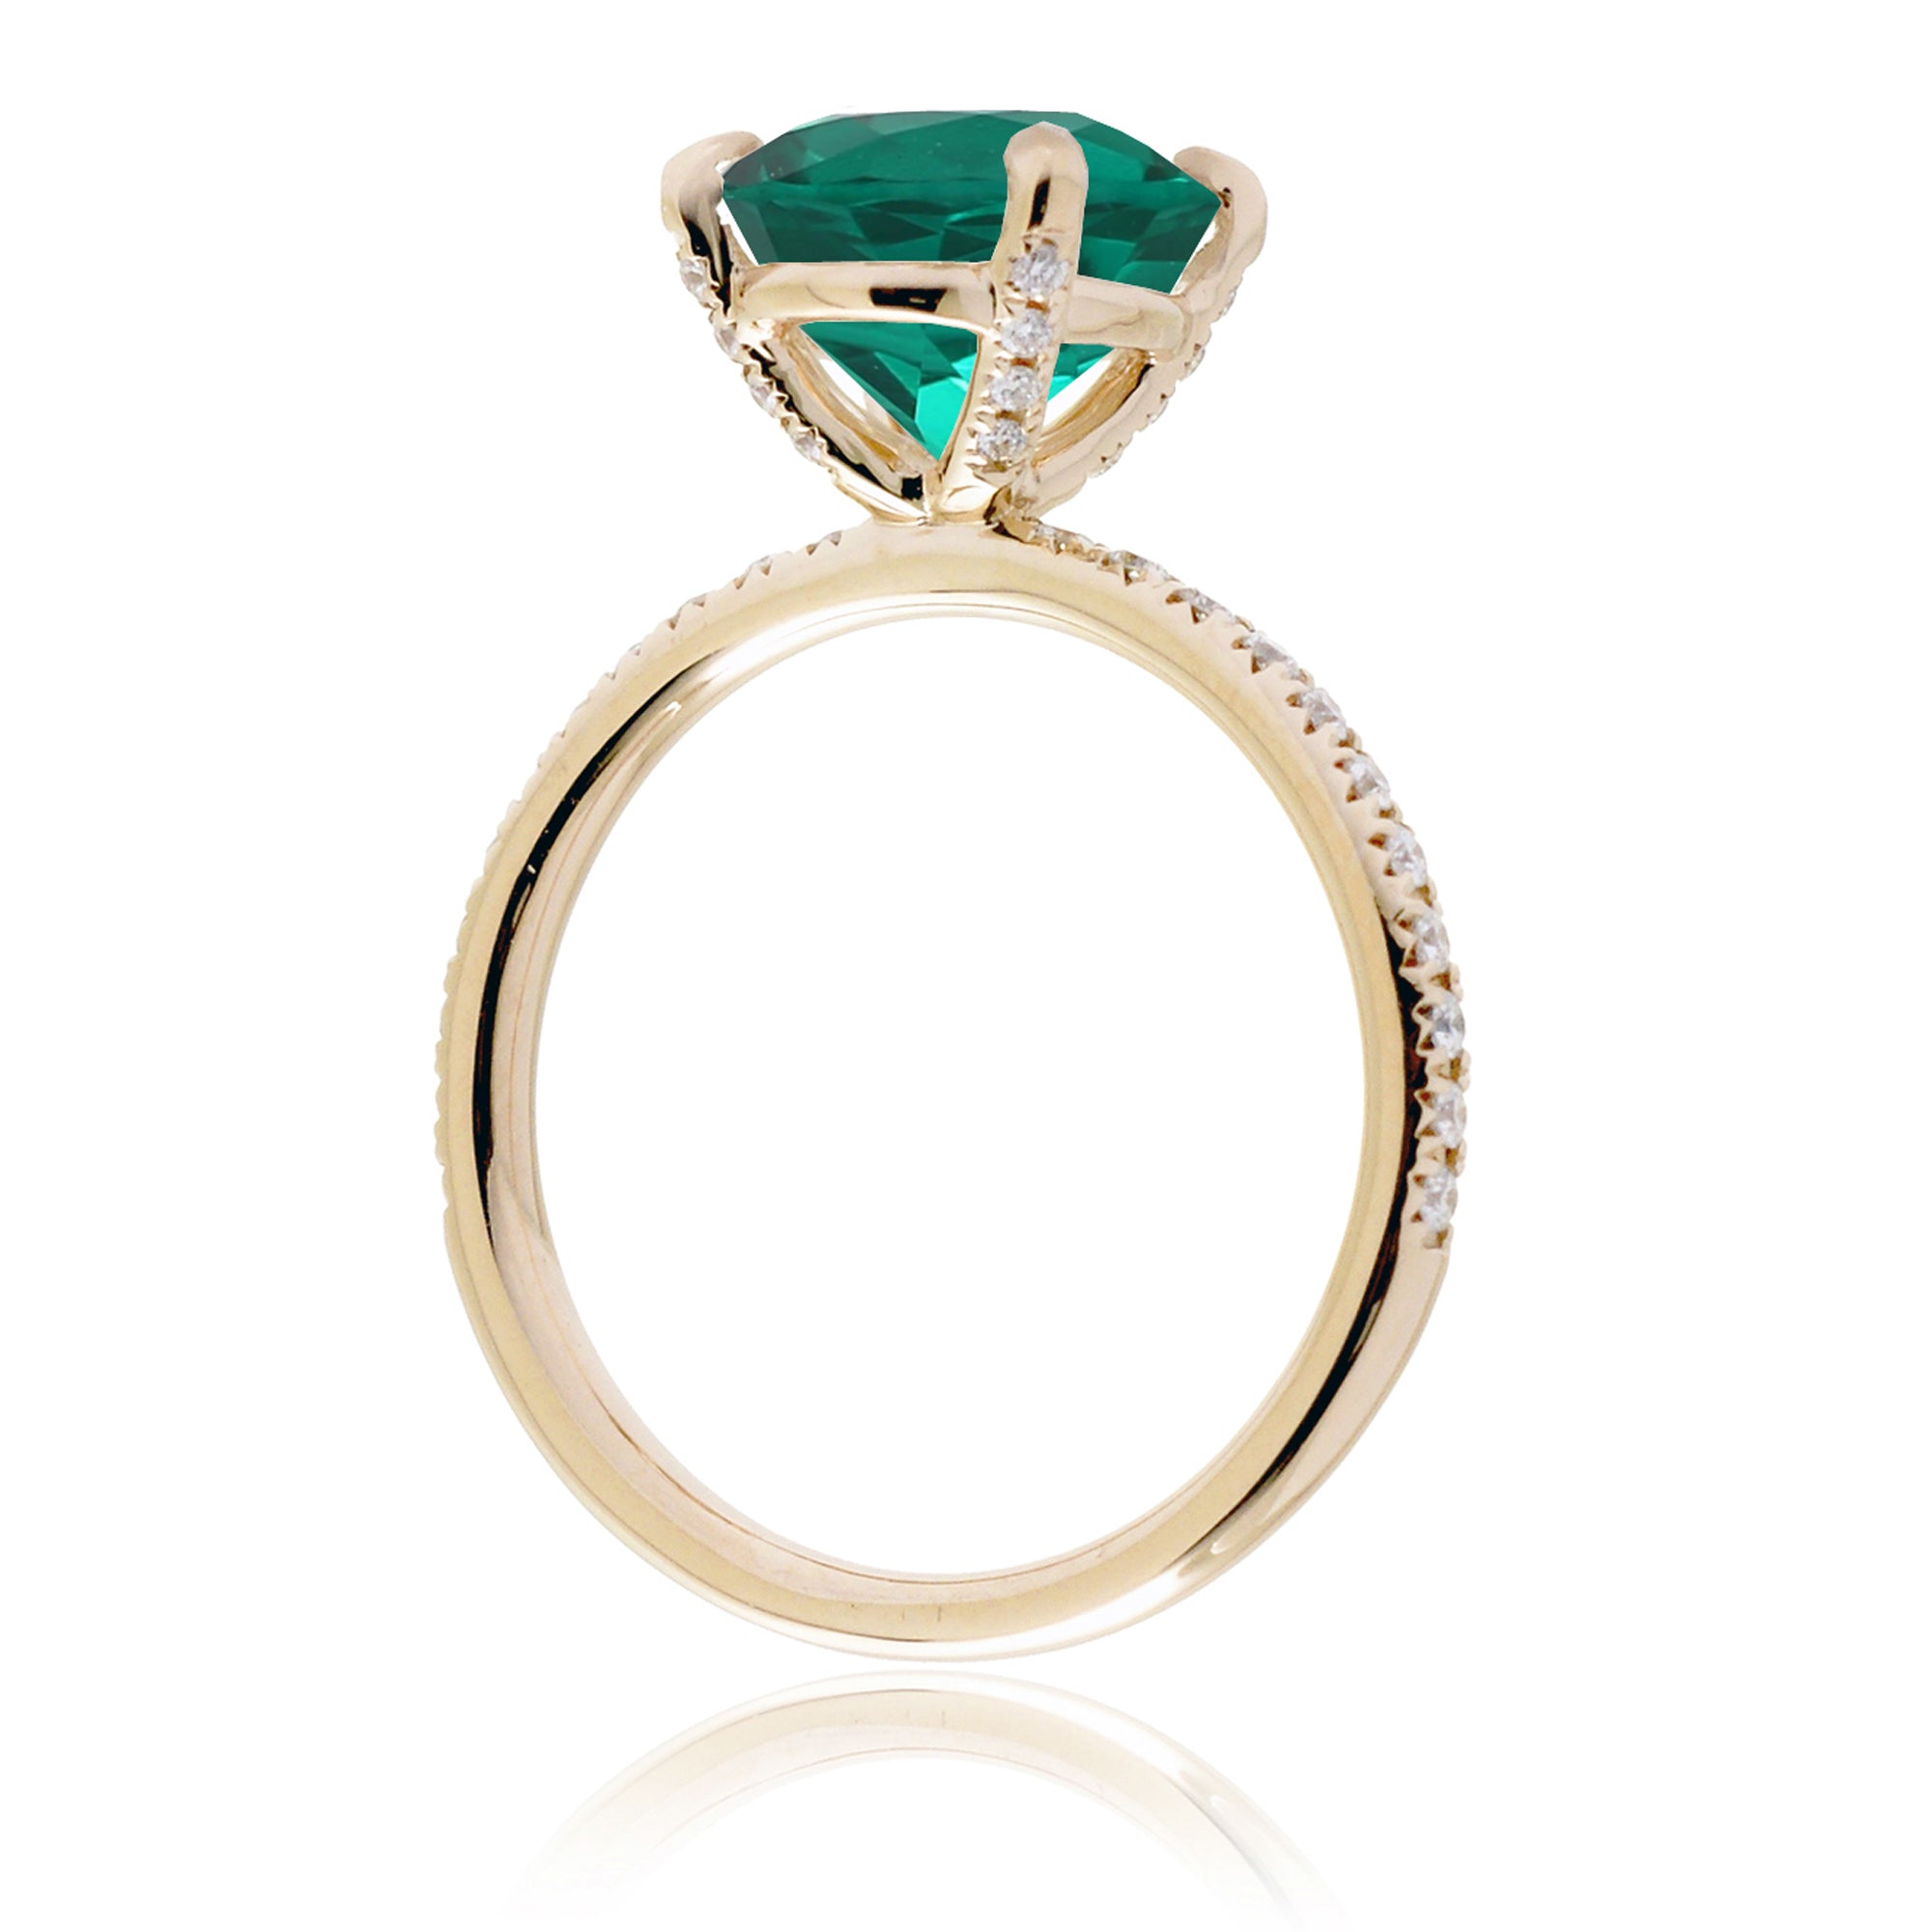 Oval green emerald diamond band engagement ring yellow gold - the Ava